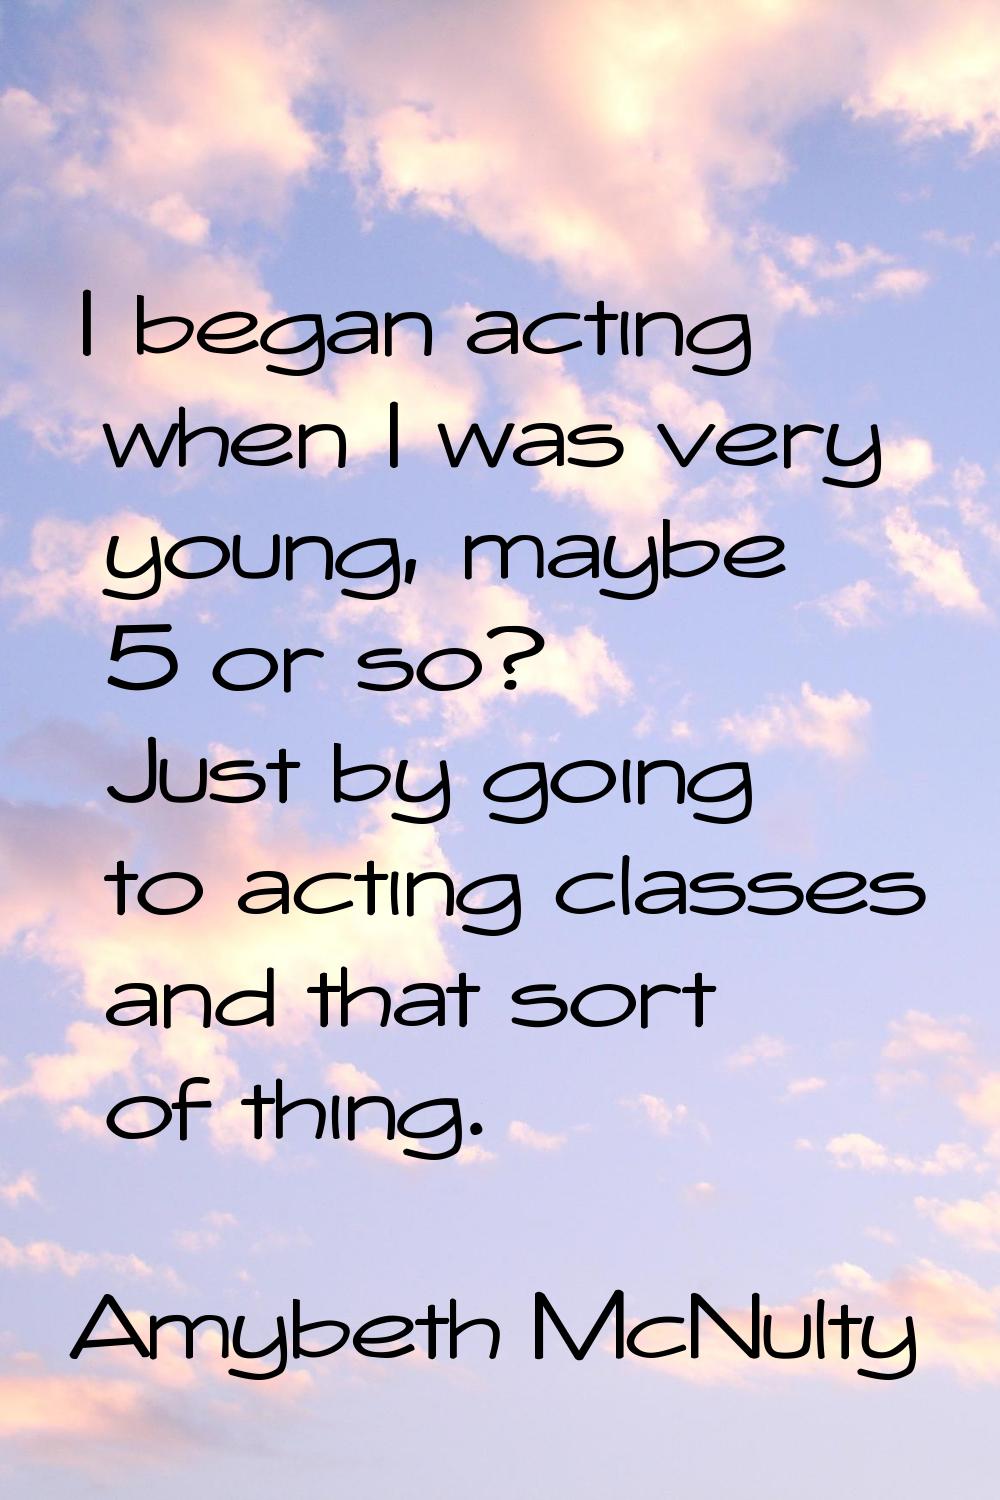 I began acting when I was very young, maybe 5 or so? Just by going to acting classes and that sort 